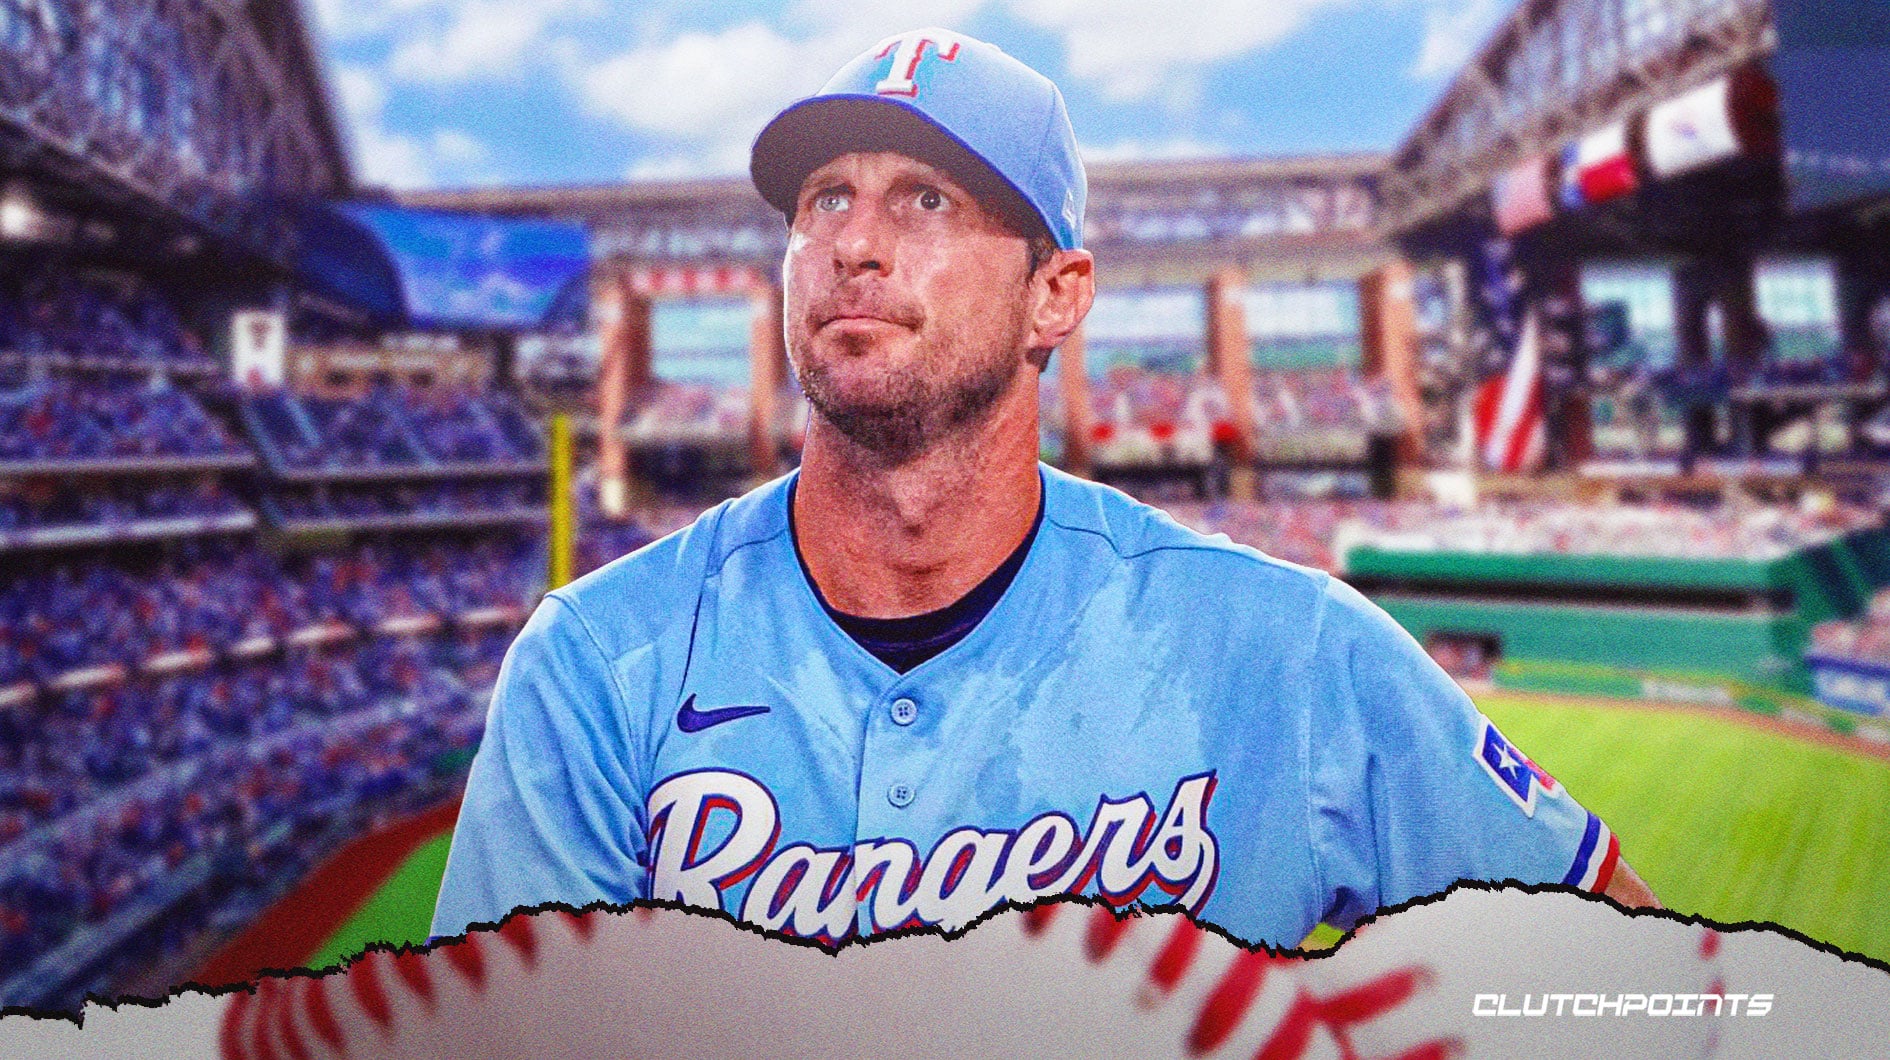 Max Scherzer injury: Rangers ace out for the year in AL wild-card race